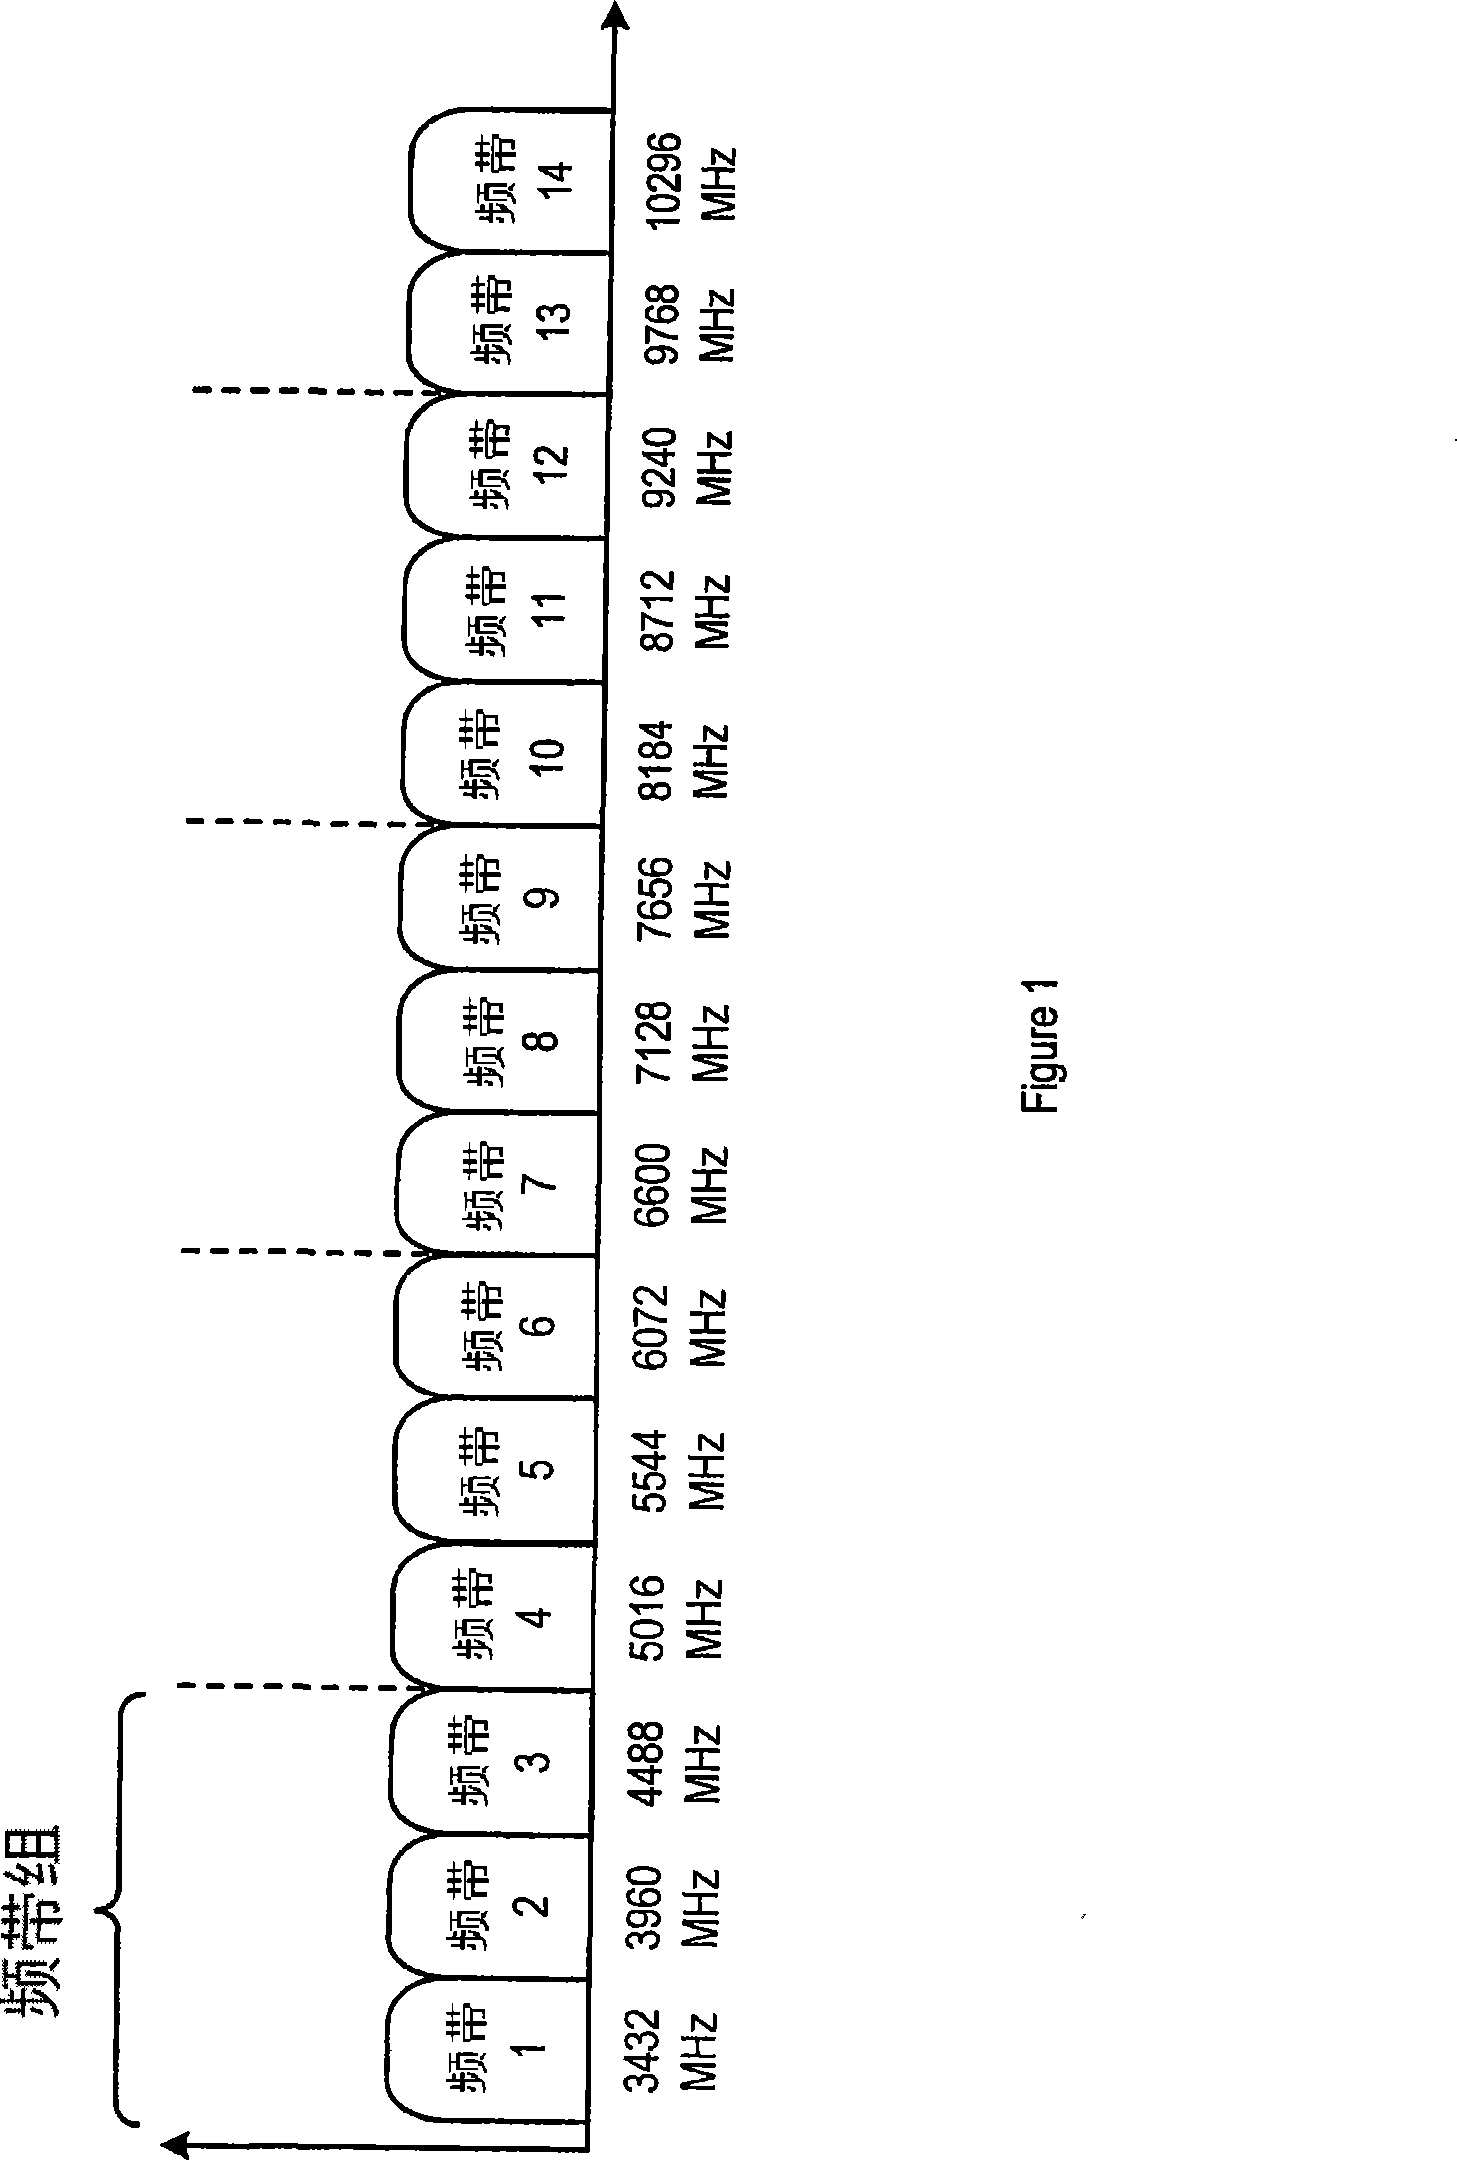 Ultra wideband communication system and method